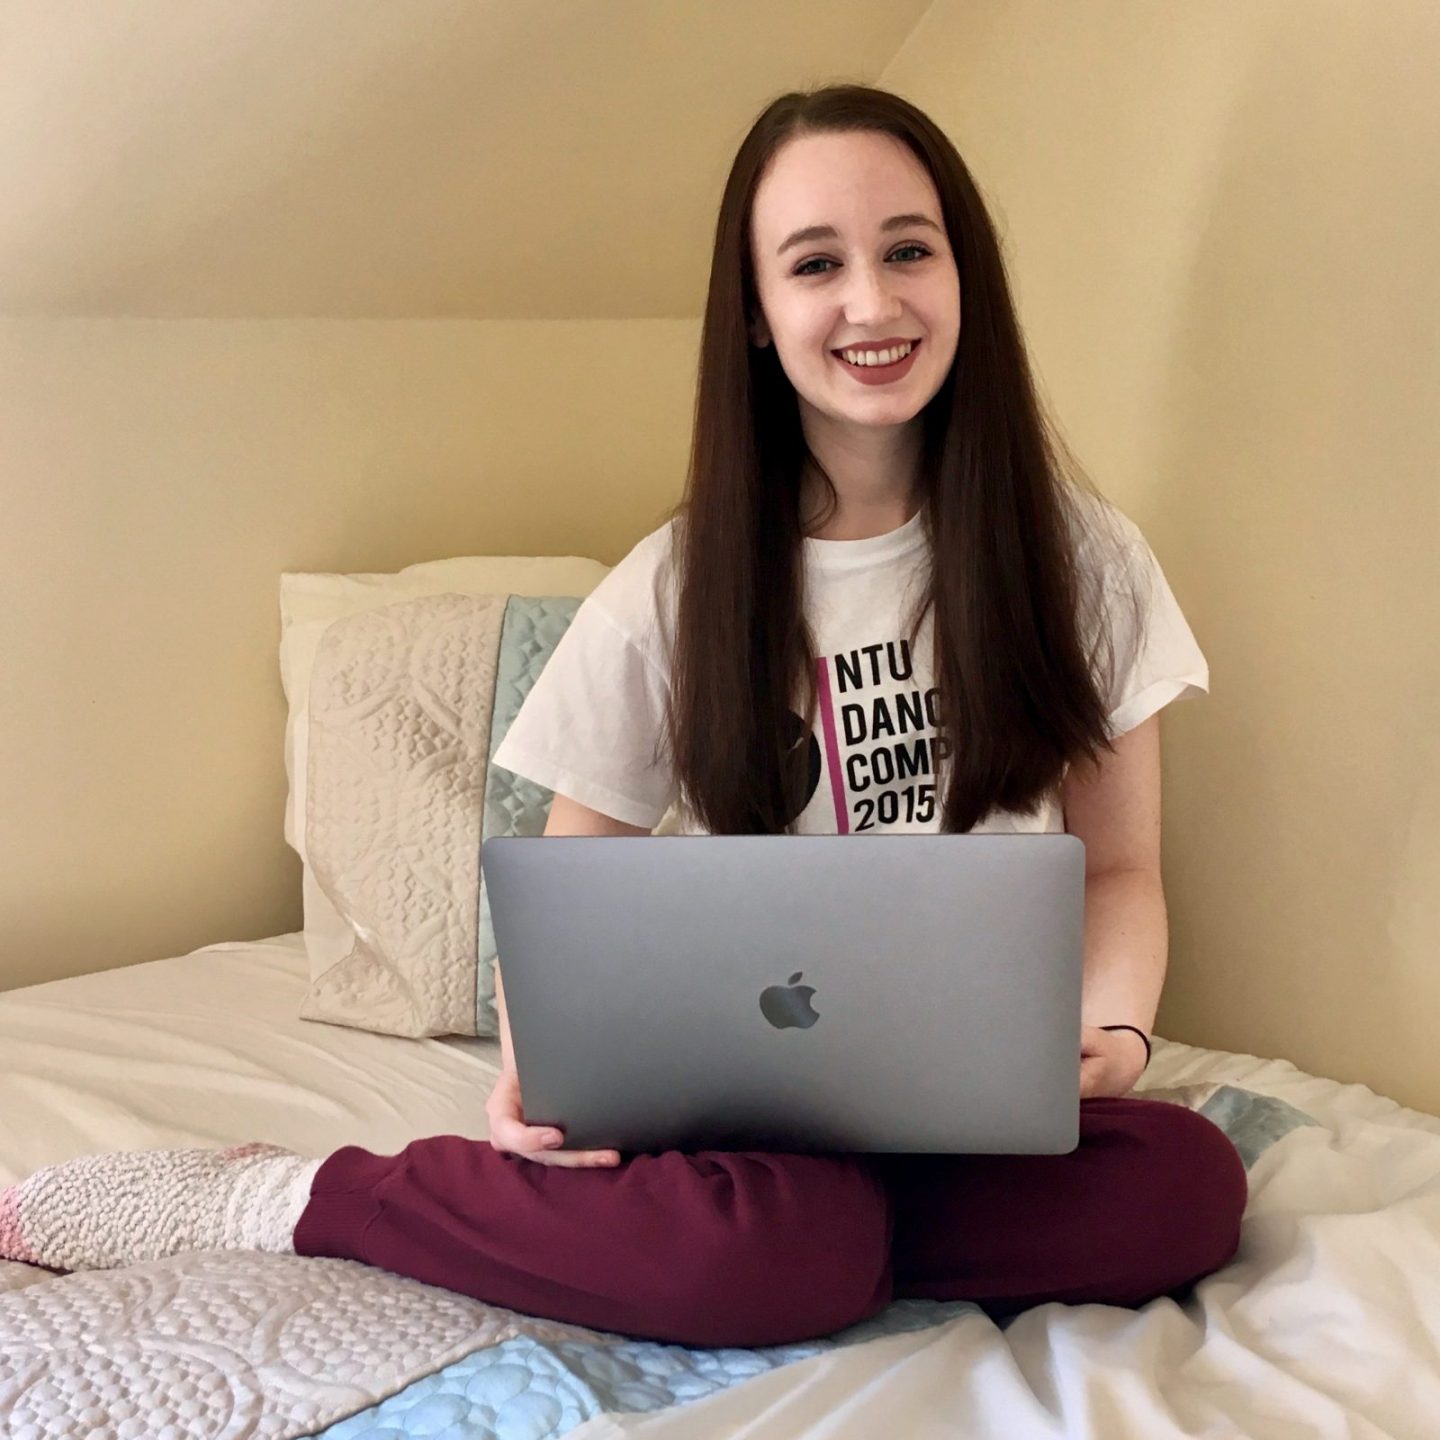 pippa sat on bed, wearing comfy clothes, with laptop propped up on her crossed legs. pippa has long brown hair down and is smiling 